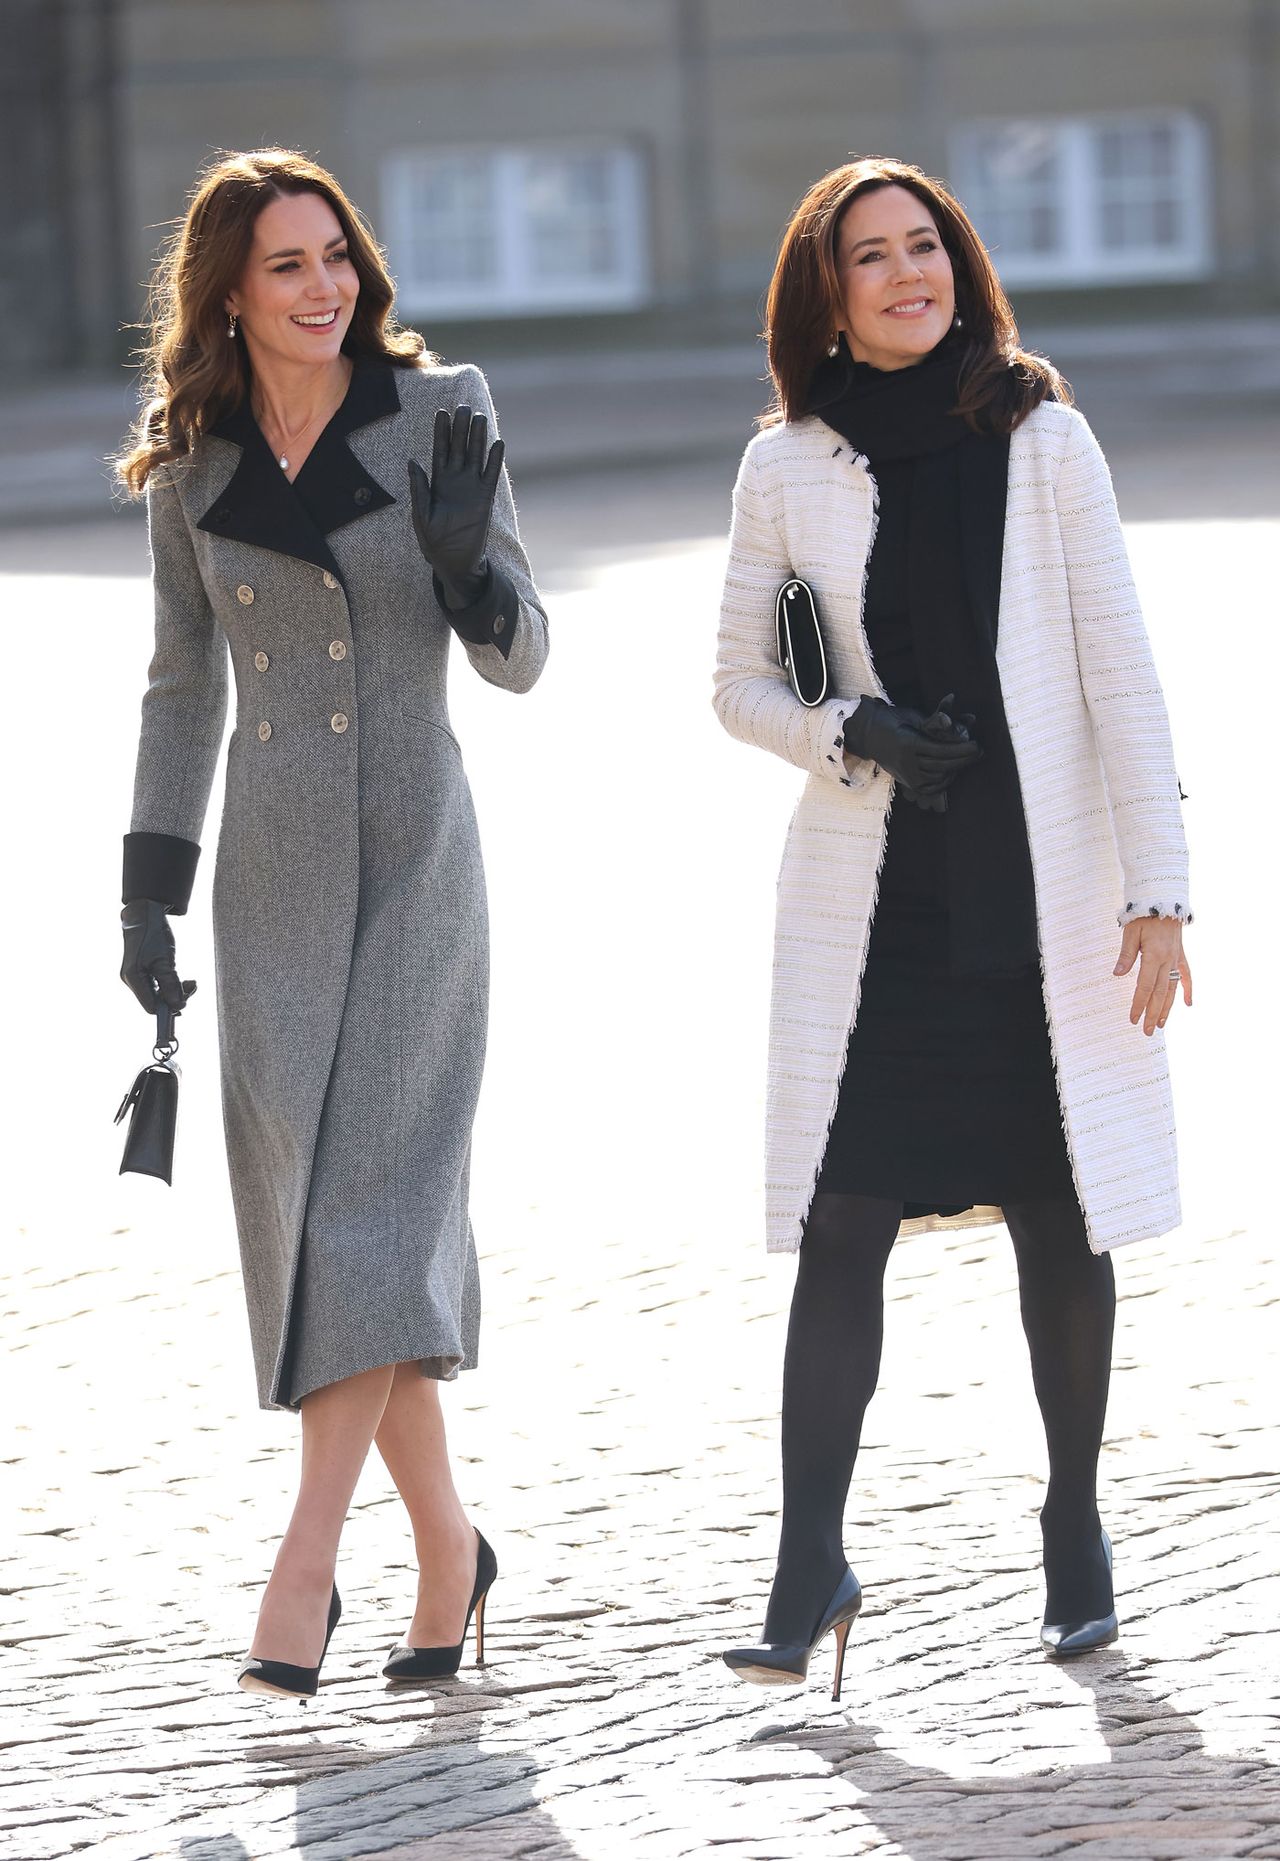 Kate Middleton Wore Skinny Jeans With $200 Boots in Denmark | Who What Wear